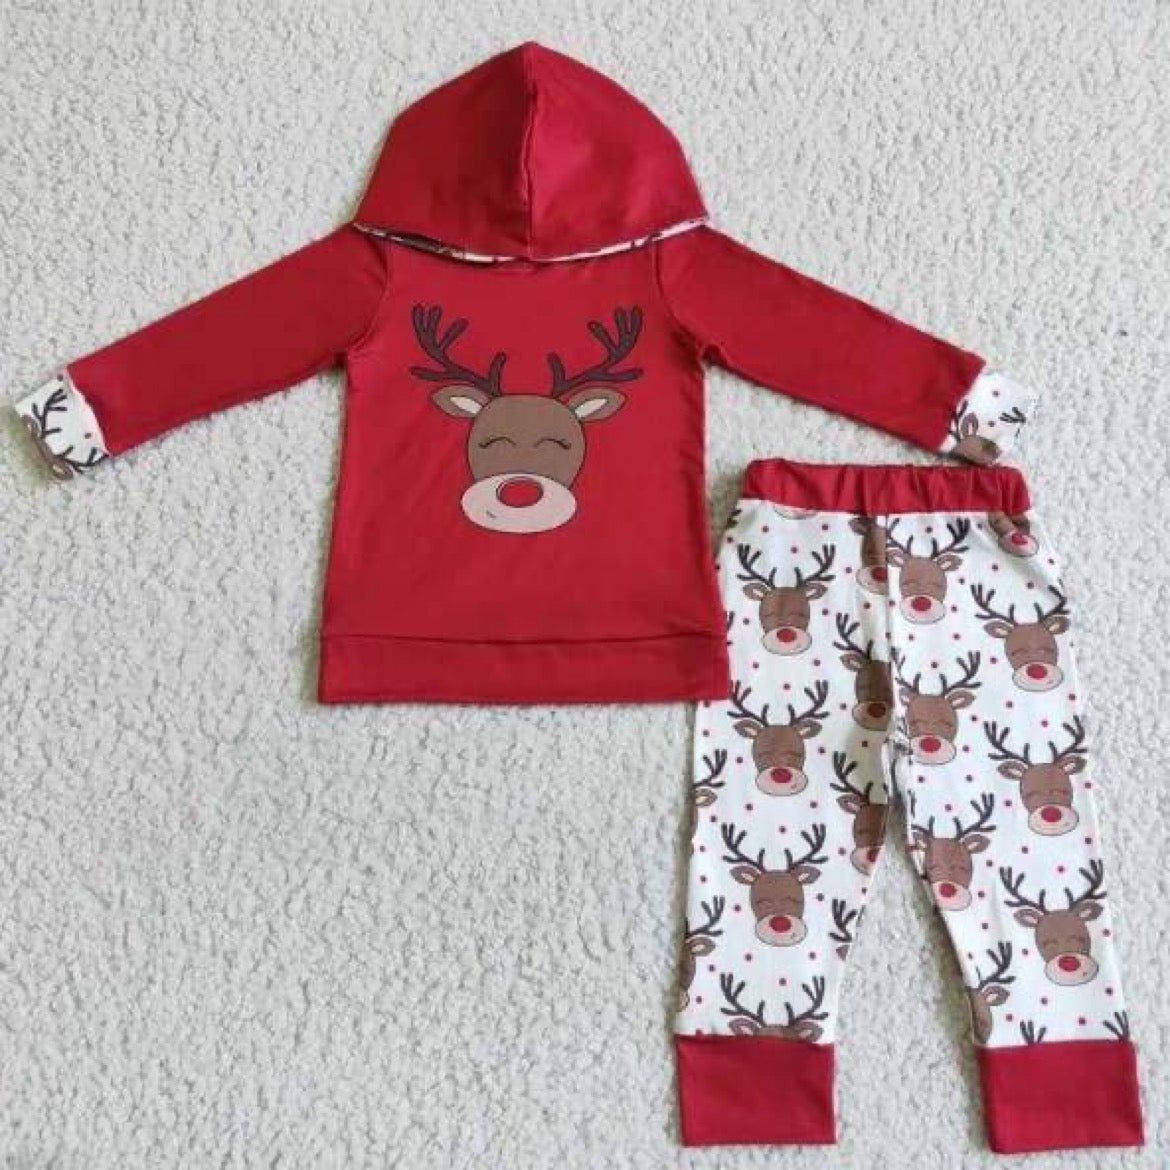 Reindeer Outfit SHIPPING NOV 28-DEC 12